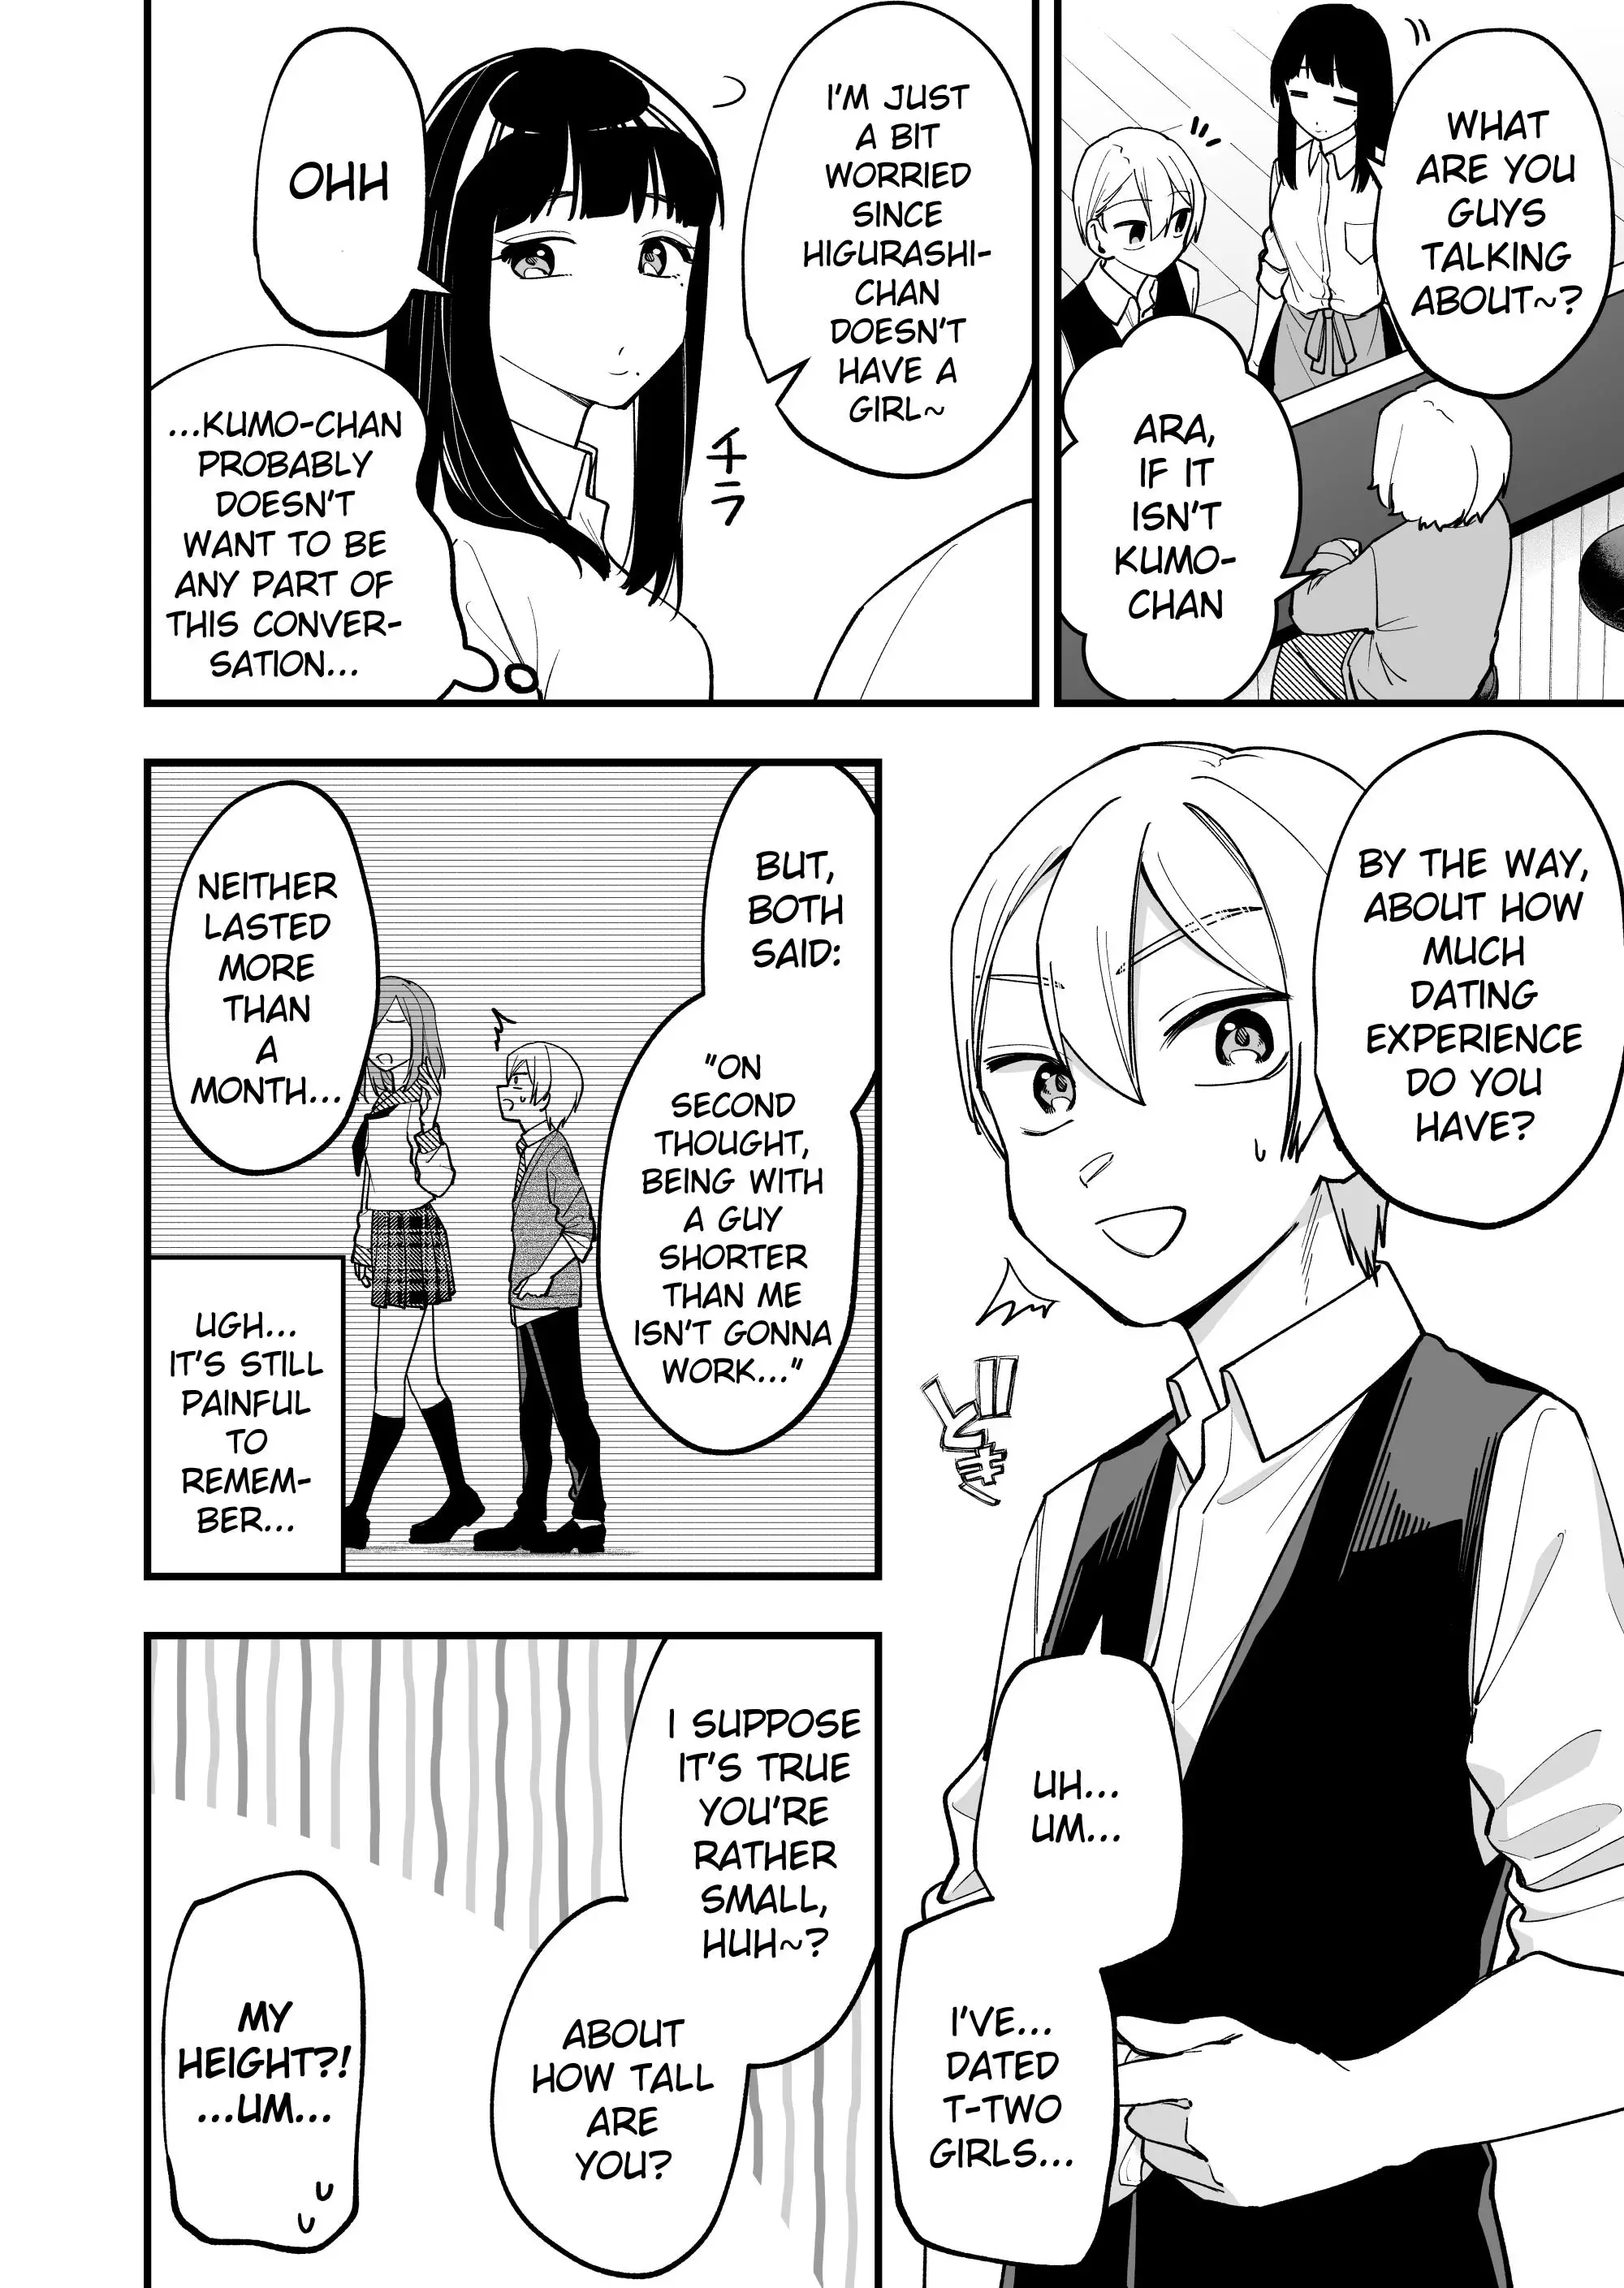 The Manager And The Oblivious Waitress - 16 page 2-f32ac956